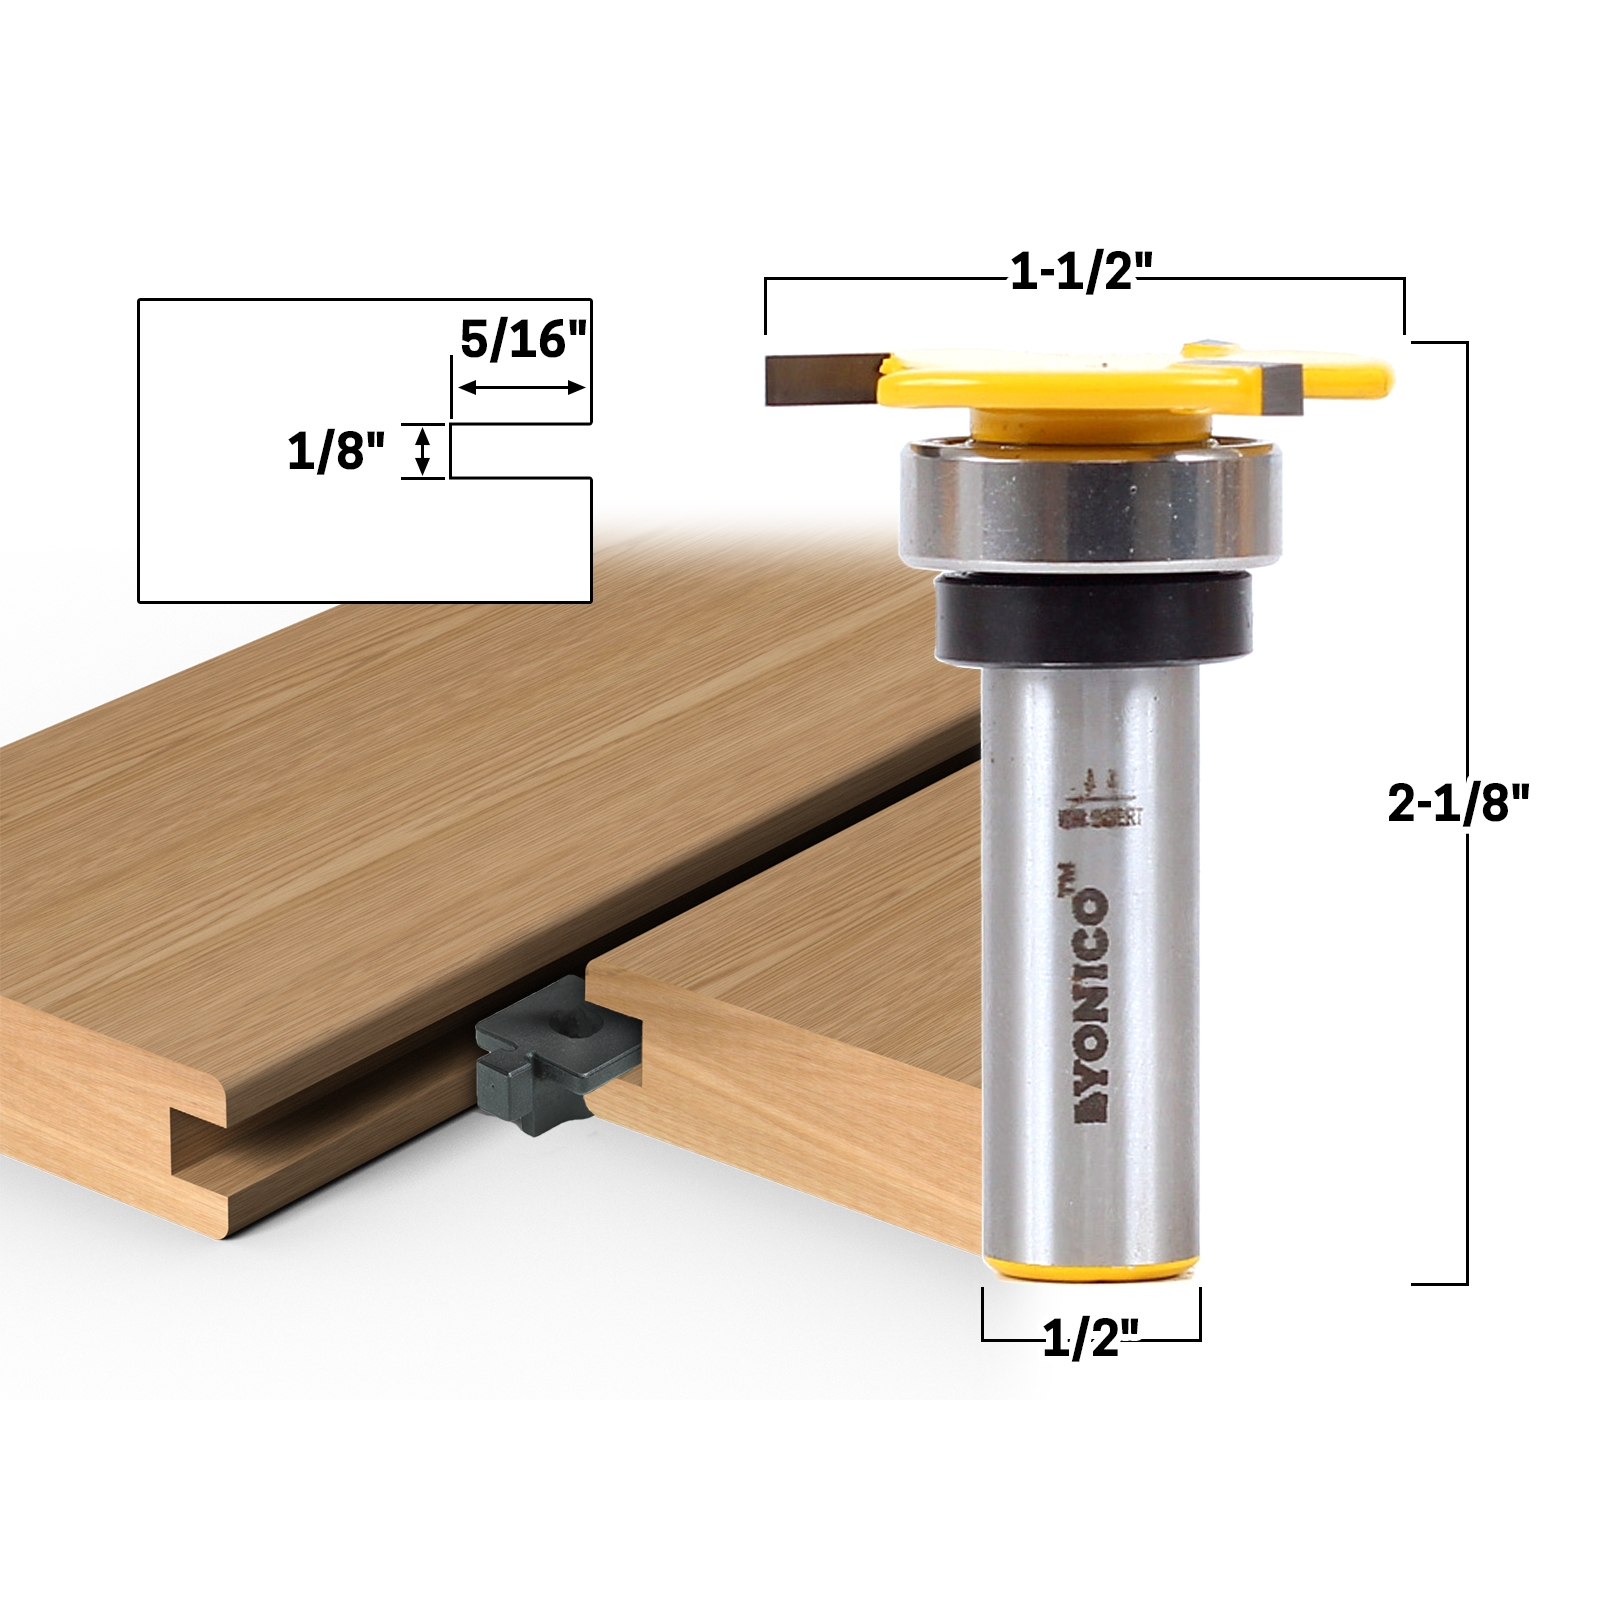 1/2'' Shank 1/2'' T-Slot Cutter Router Bit For Woodworking Milling YJUS 